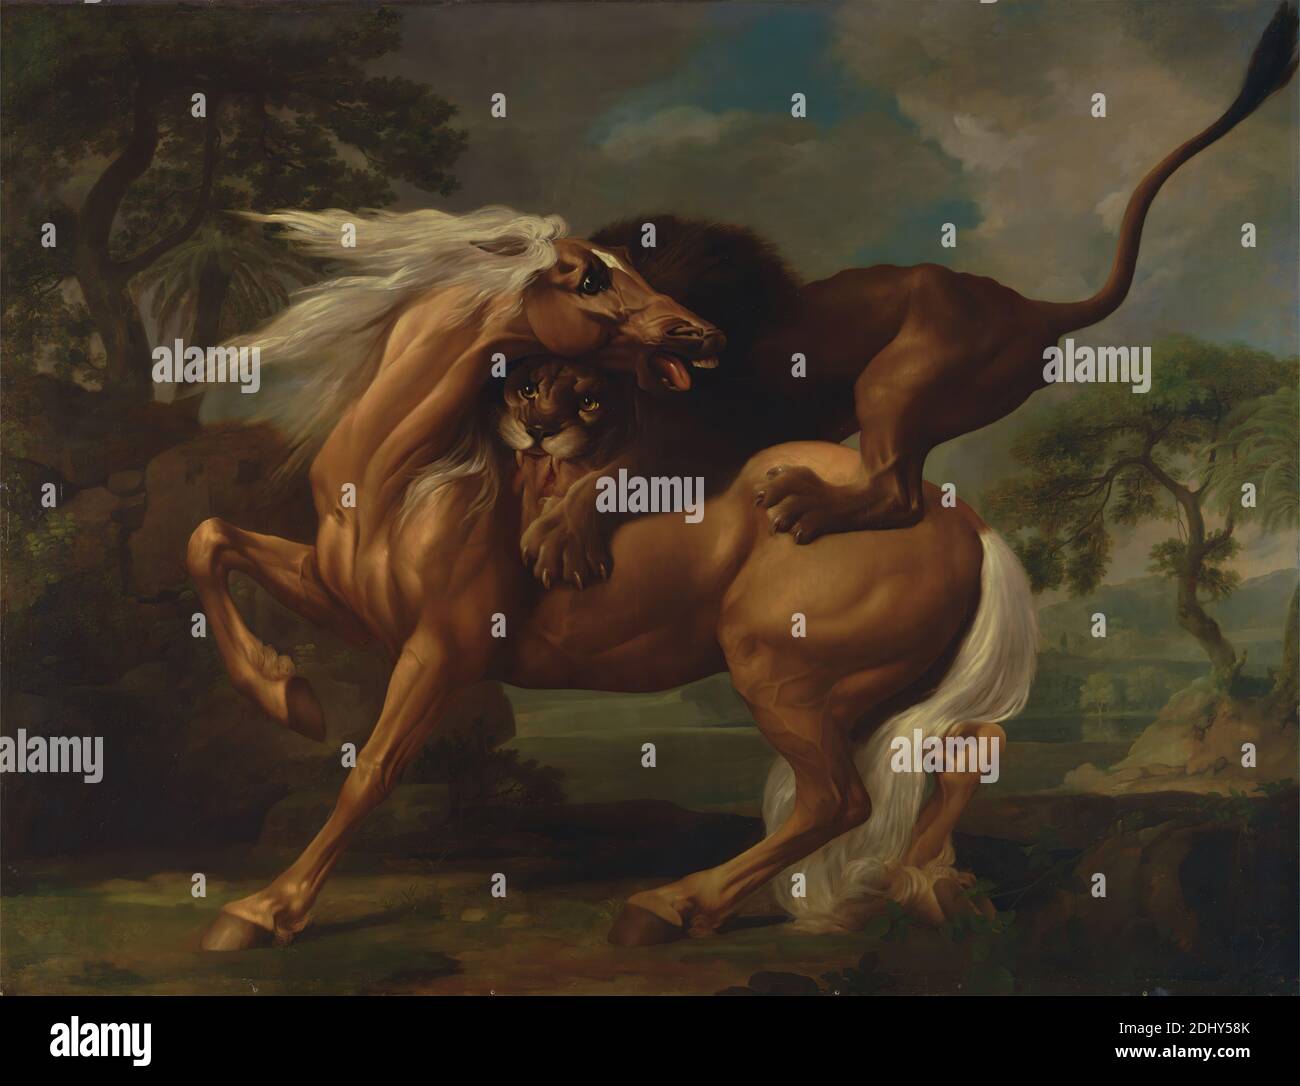 A Lion Attacking a Horse, George Stubbs, 1724–1806, British, 1762, Oil on canvas, Support (PTG): 96 x 131 inches (243.8 x 332.7 cm), allegory, animal art, antiques, biting, blood (animal material), drama, hills, horse (animal), landscape, lion, mythology, rocks (landforms), sculpture, shore (landform), symbolism, trees Stock Photo